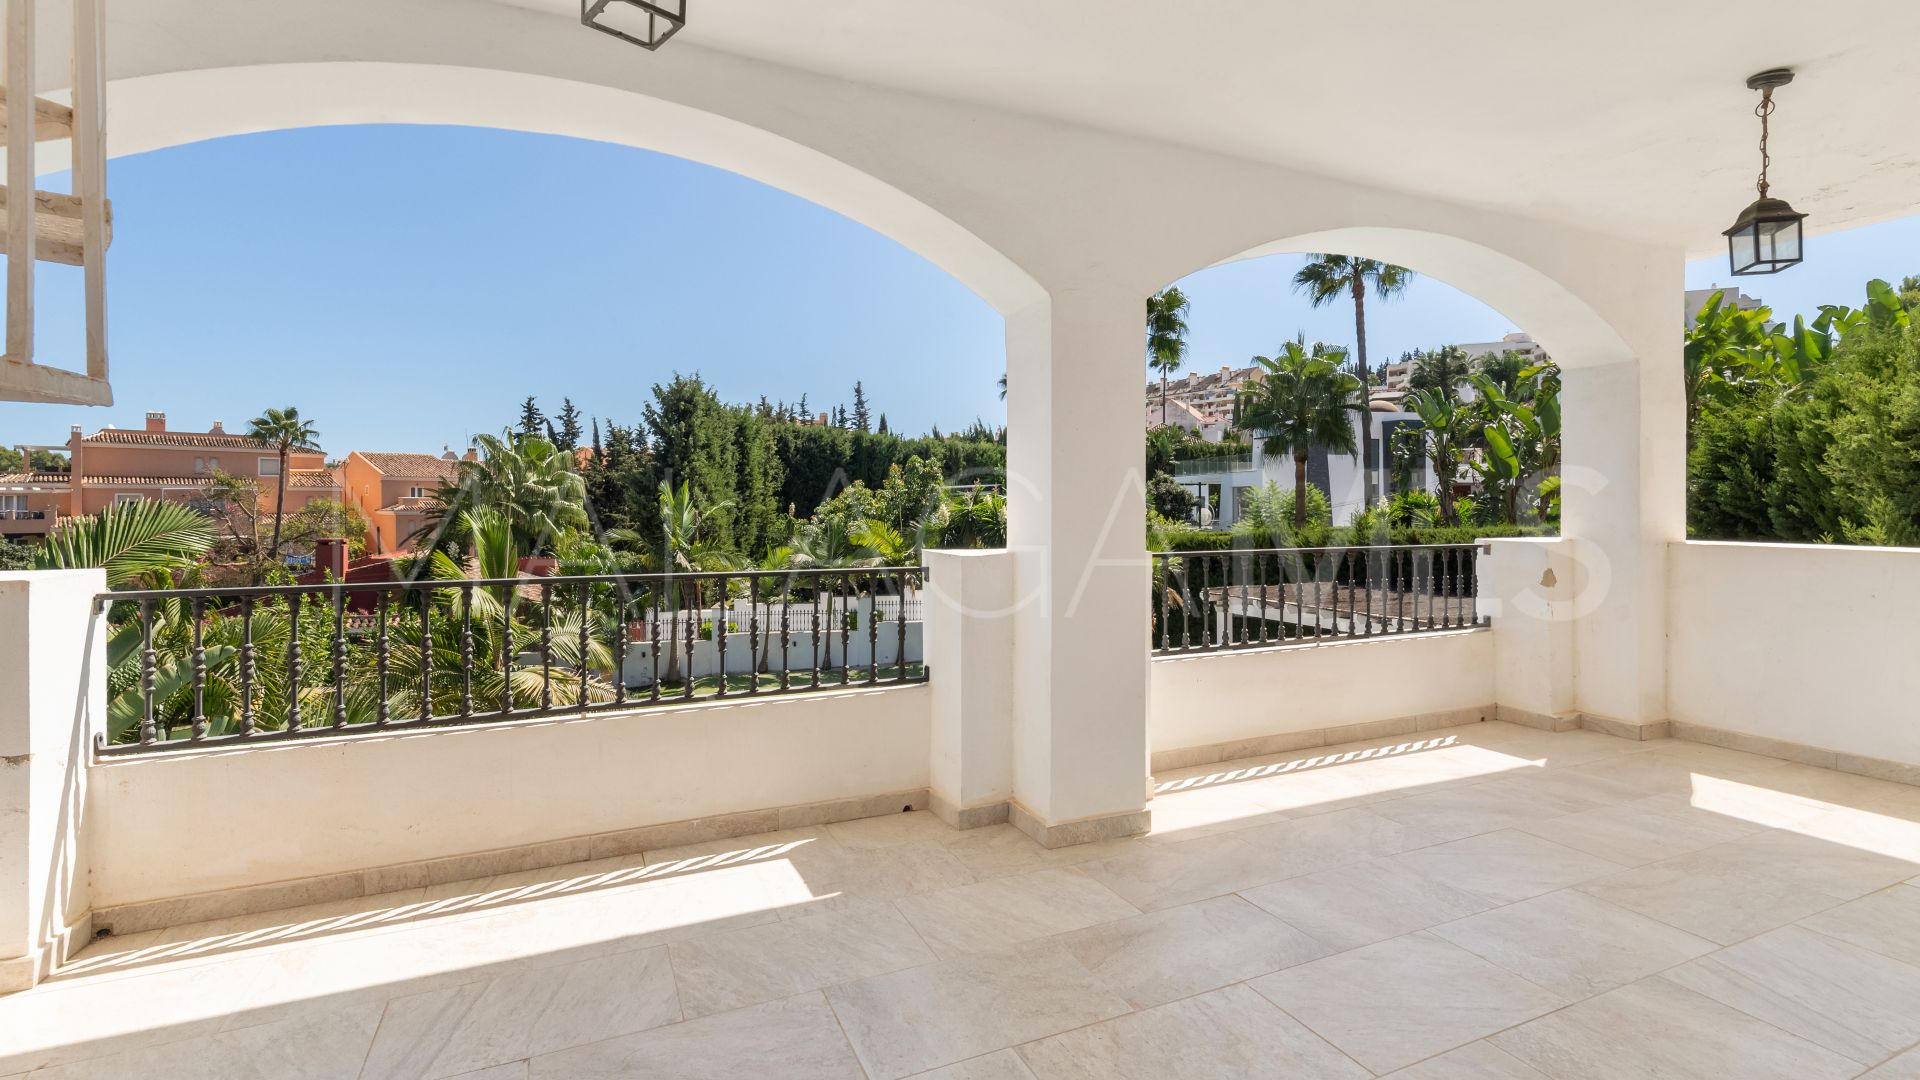 Nueva Andalucia, villa for sale with 4 bedrooms